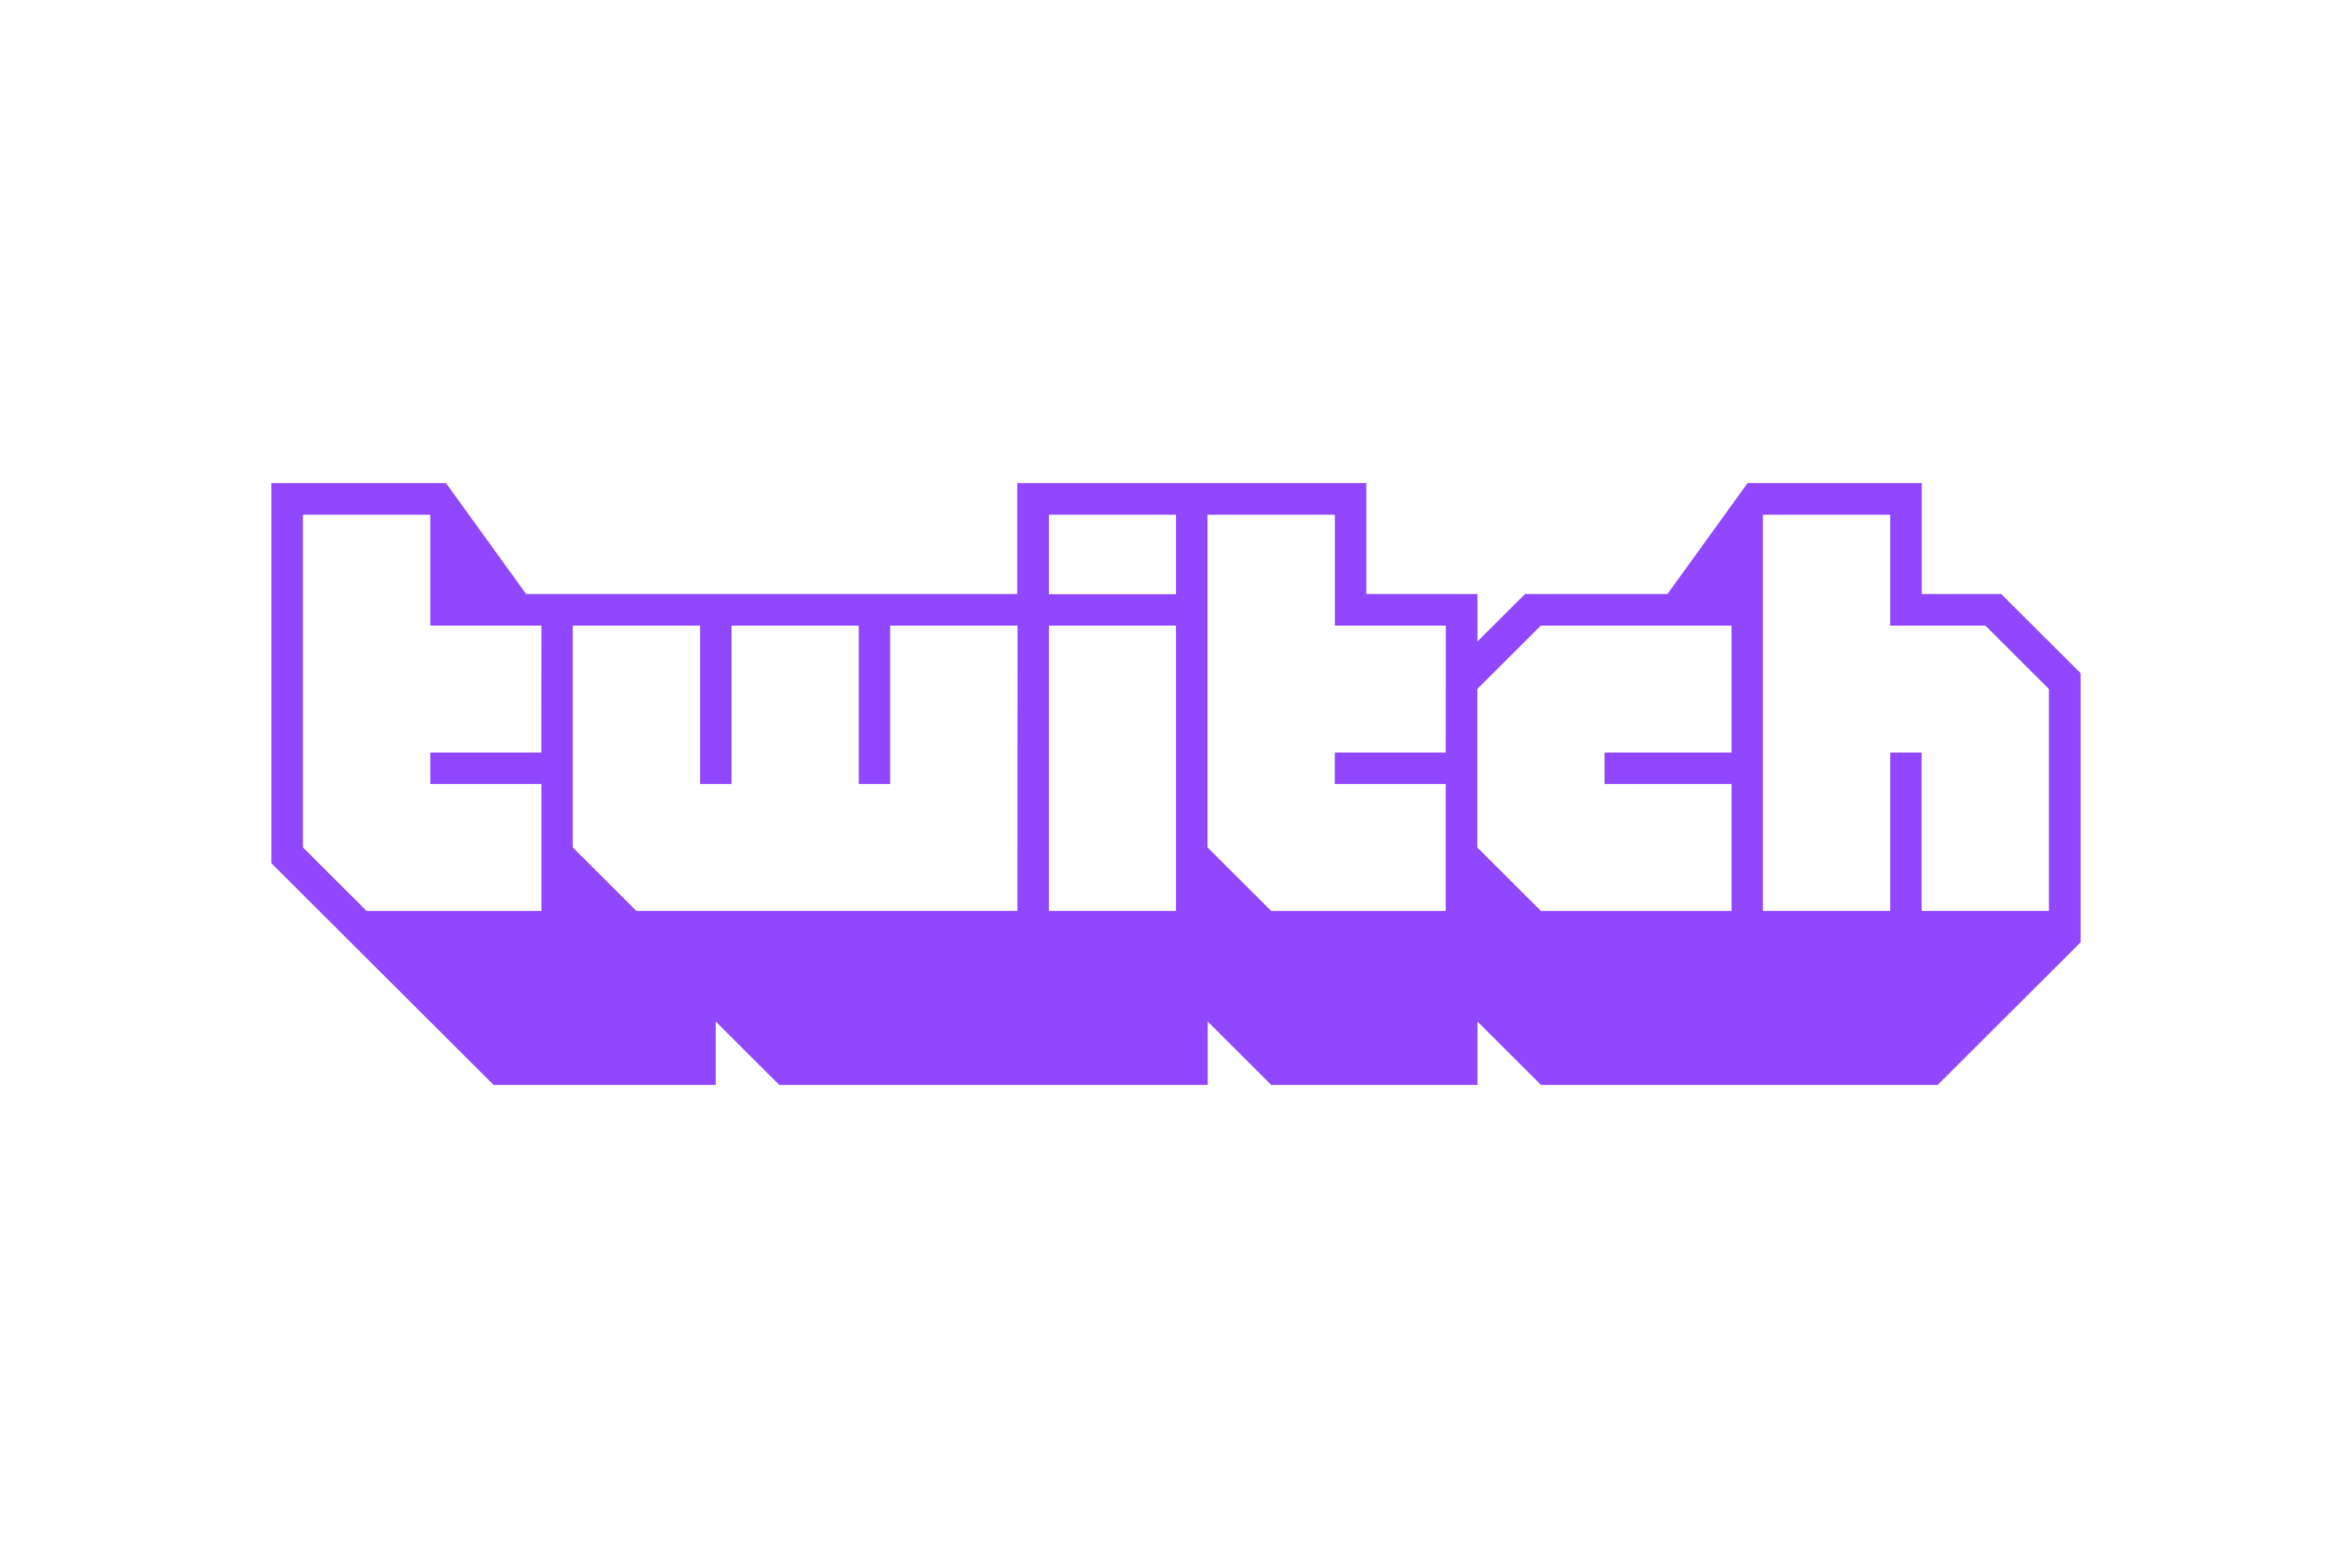 Download Twitch Logo in SVG Vector or PNG File Format ... - Free Twitch Logos